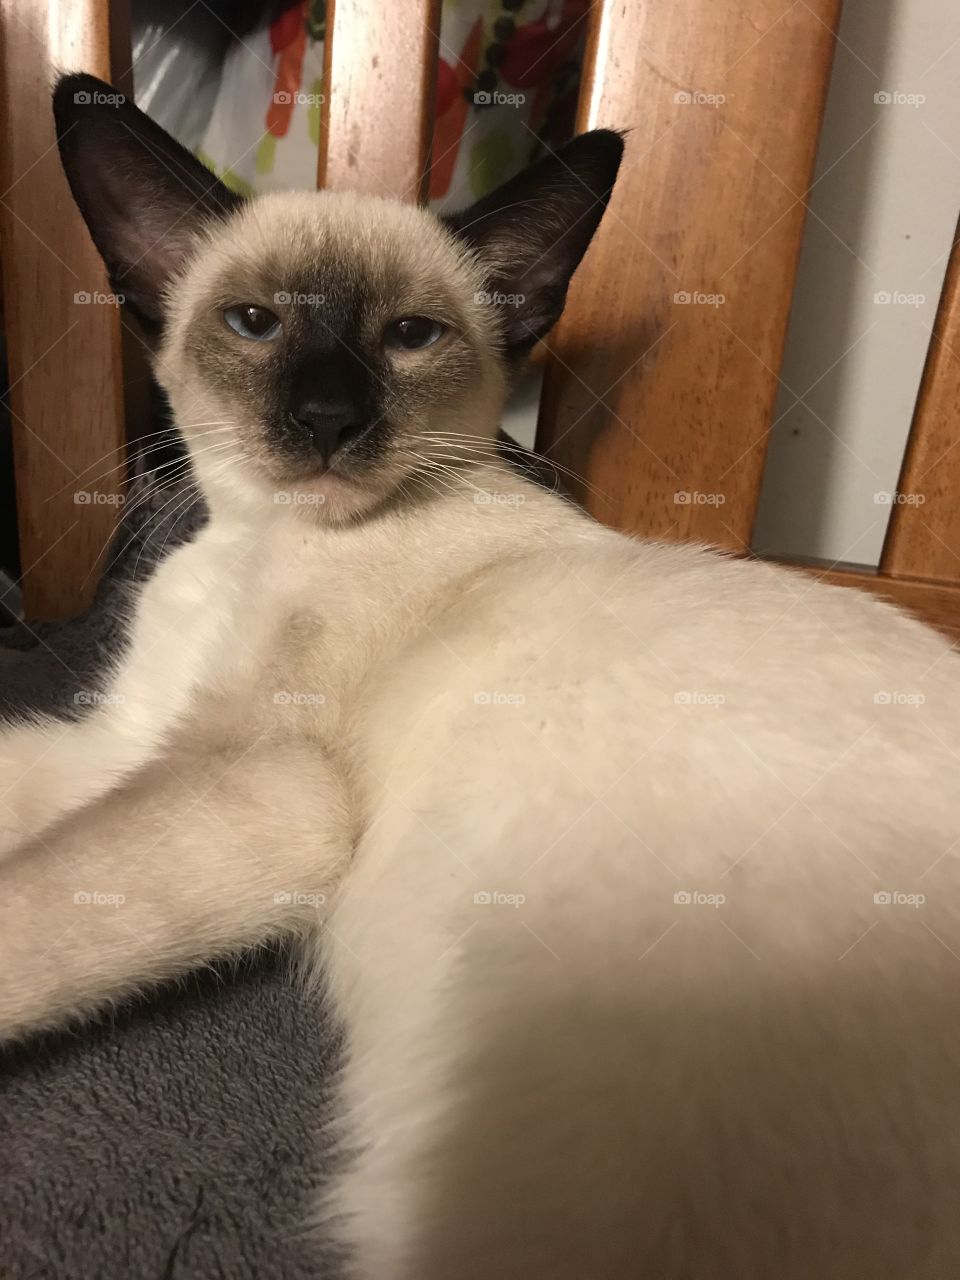 The young, male Siamese kitten glares at the camera with the most stunning blue eyes.